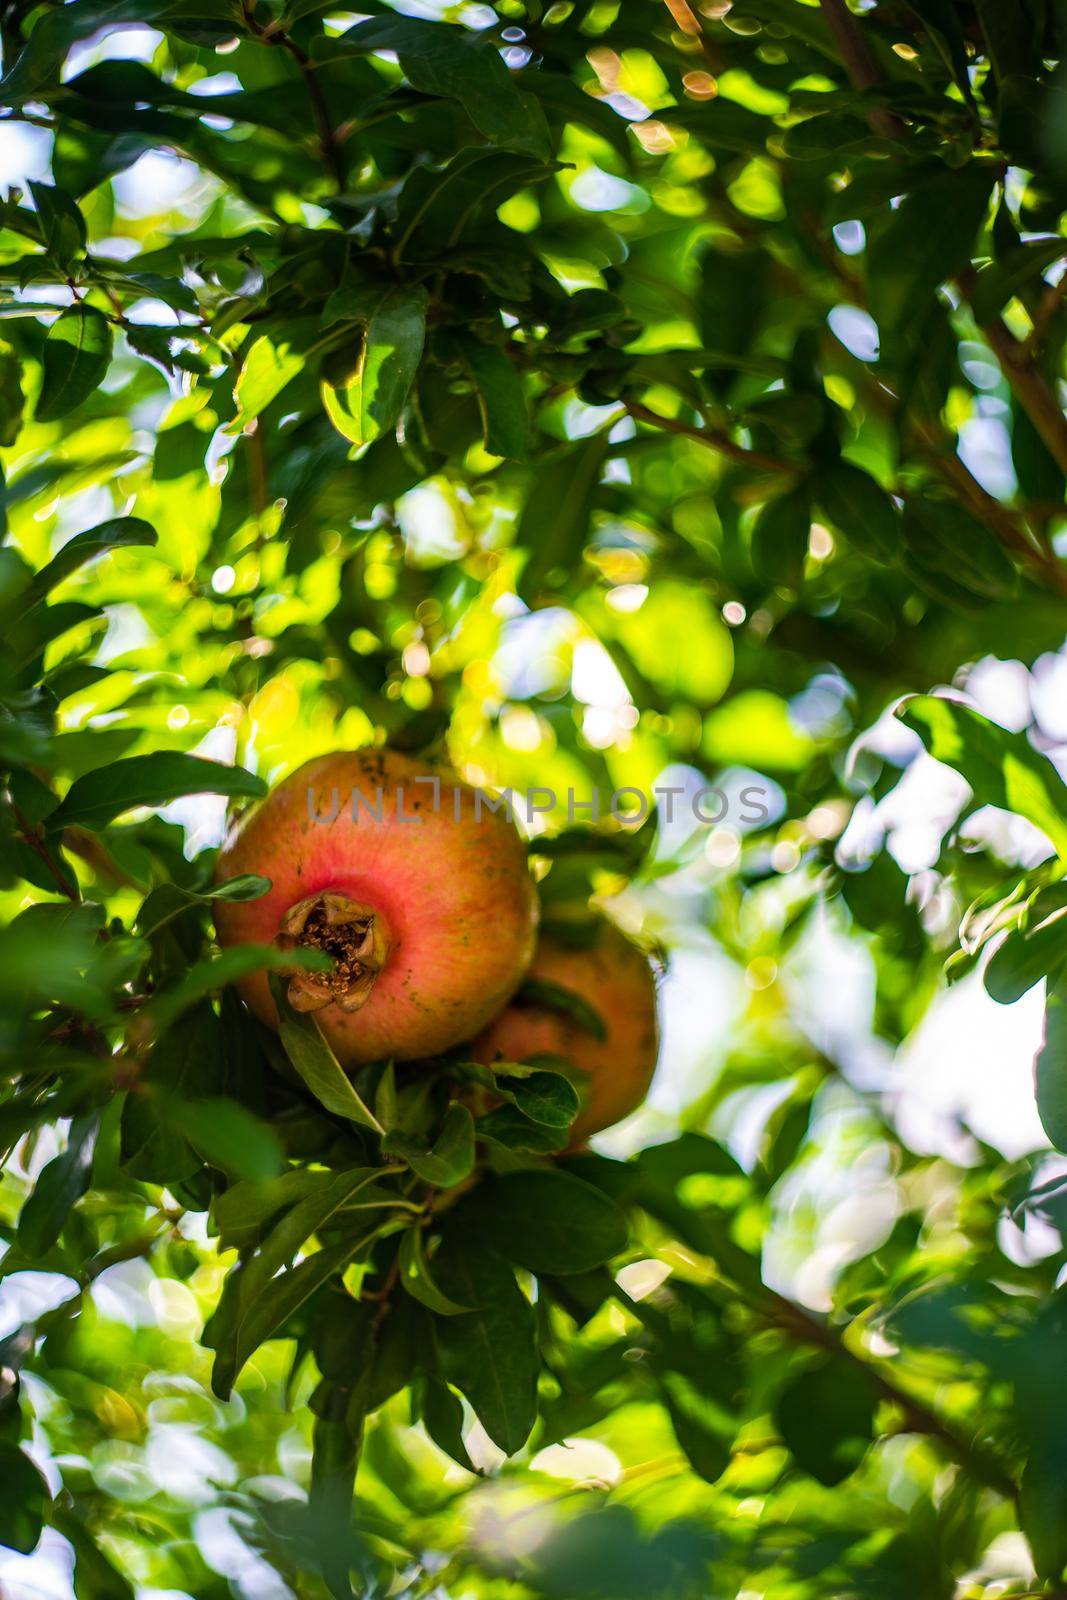 Unripe pomegranate fruits on the tree in summer garden